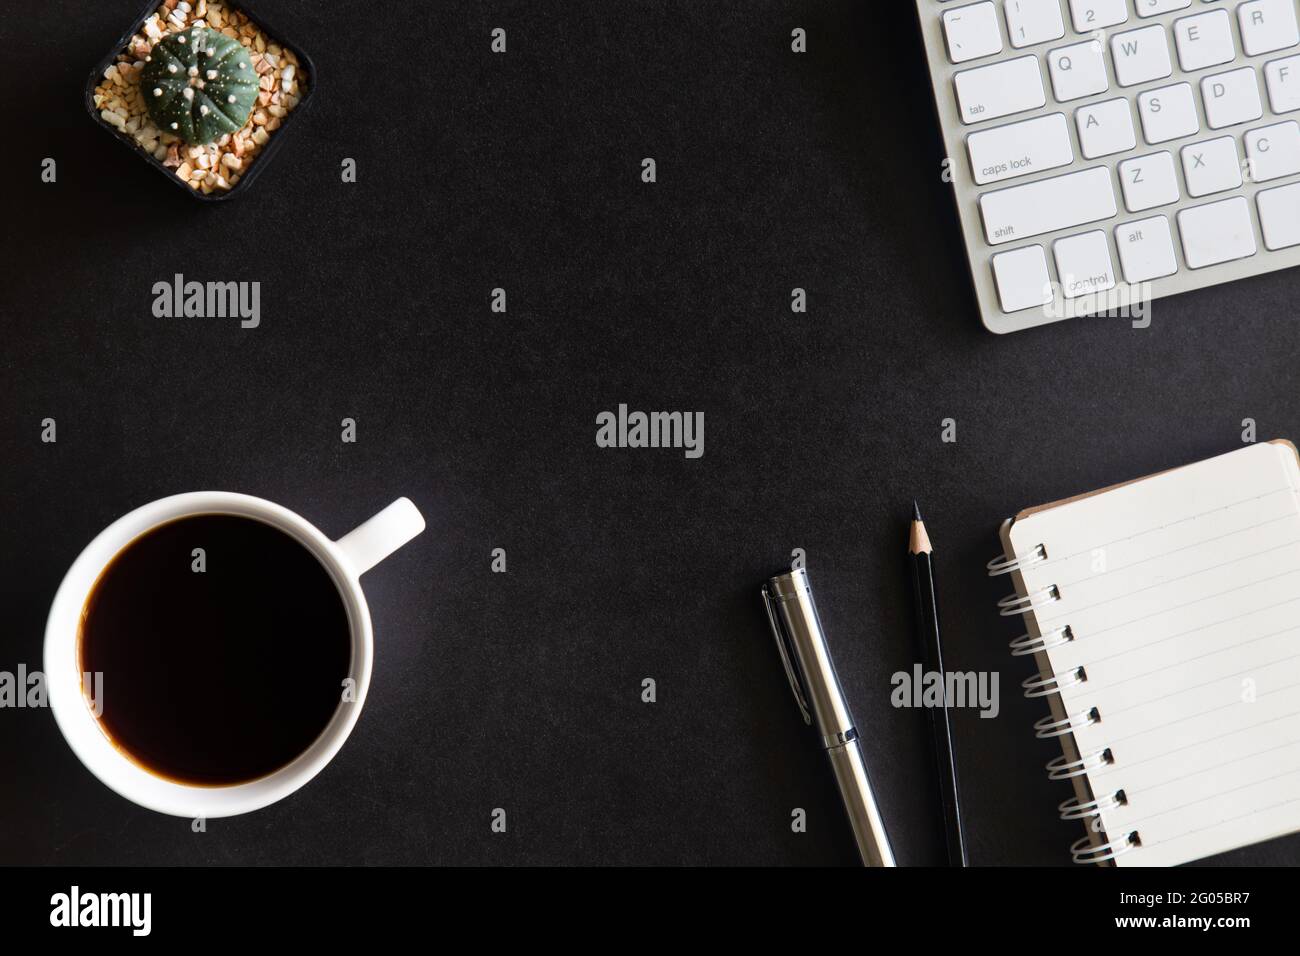 Black desk office with laptop, smartphone and other work supplies with cup of coffee. Top view with copy space for input the text. Designer workspace Stock Photo